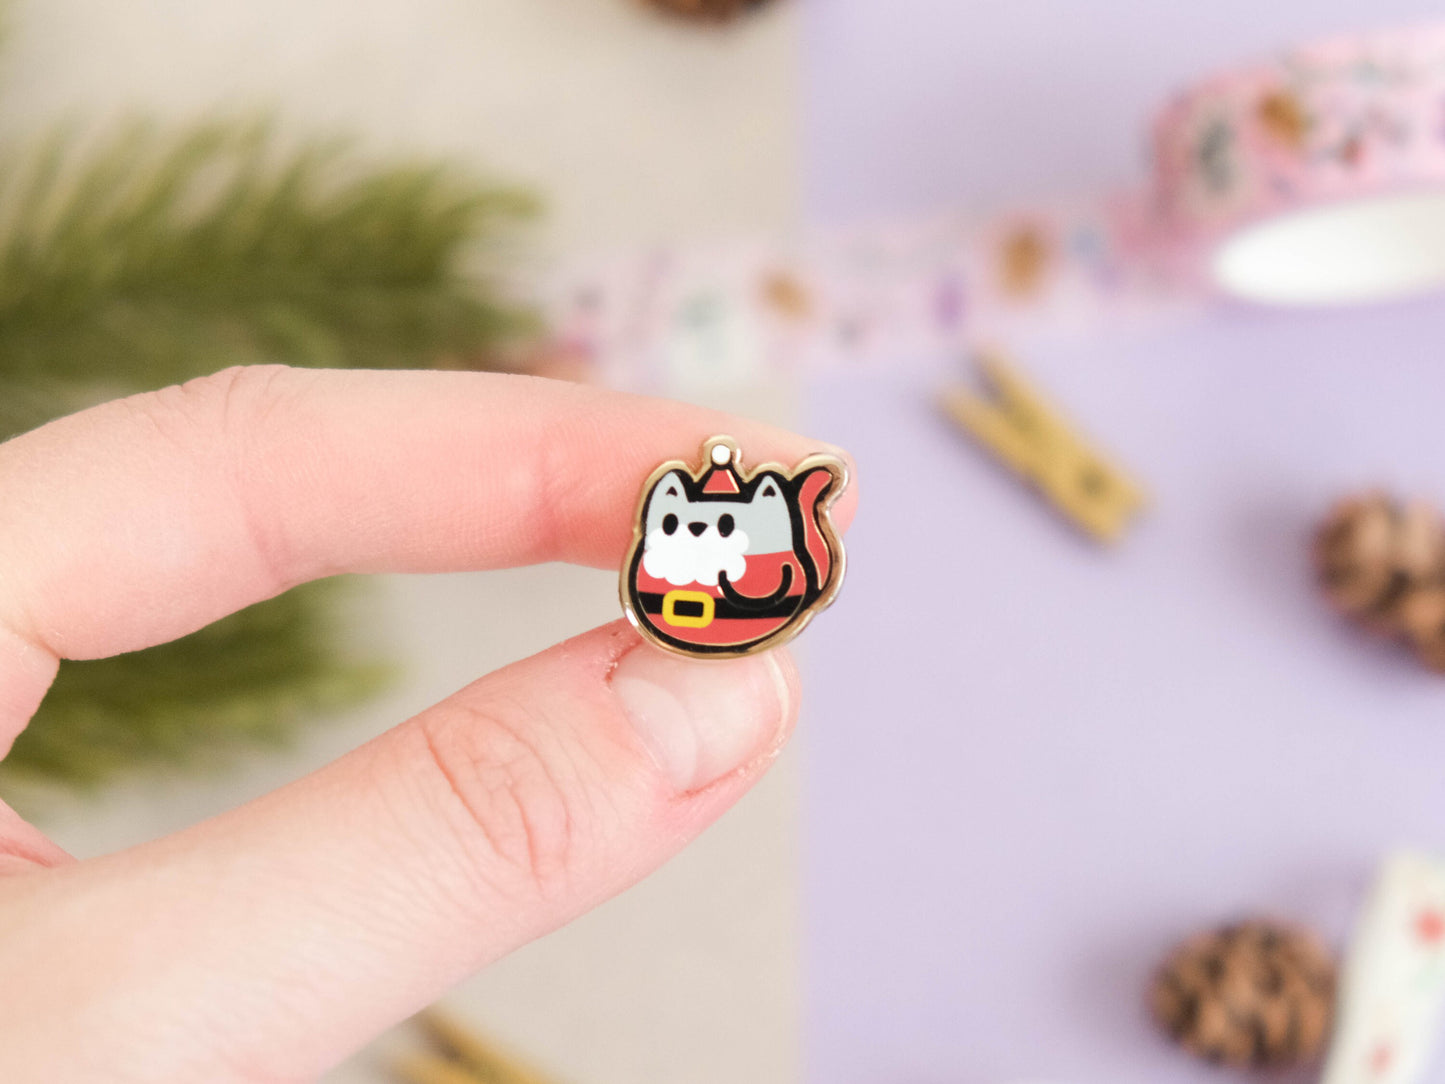 LIMITED EDITION - Mini Hard Enamel Pin Cute Cat with Santa outfit for Christmas perfect as board filler pin